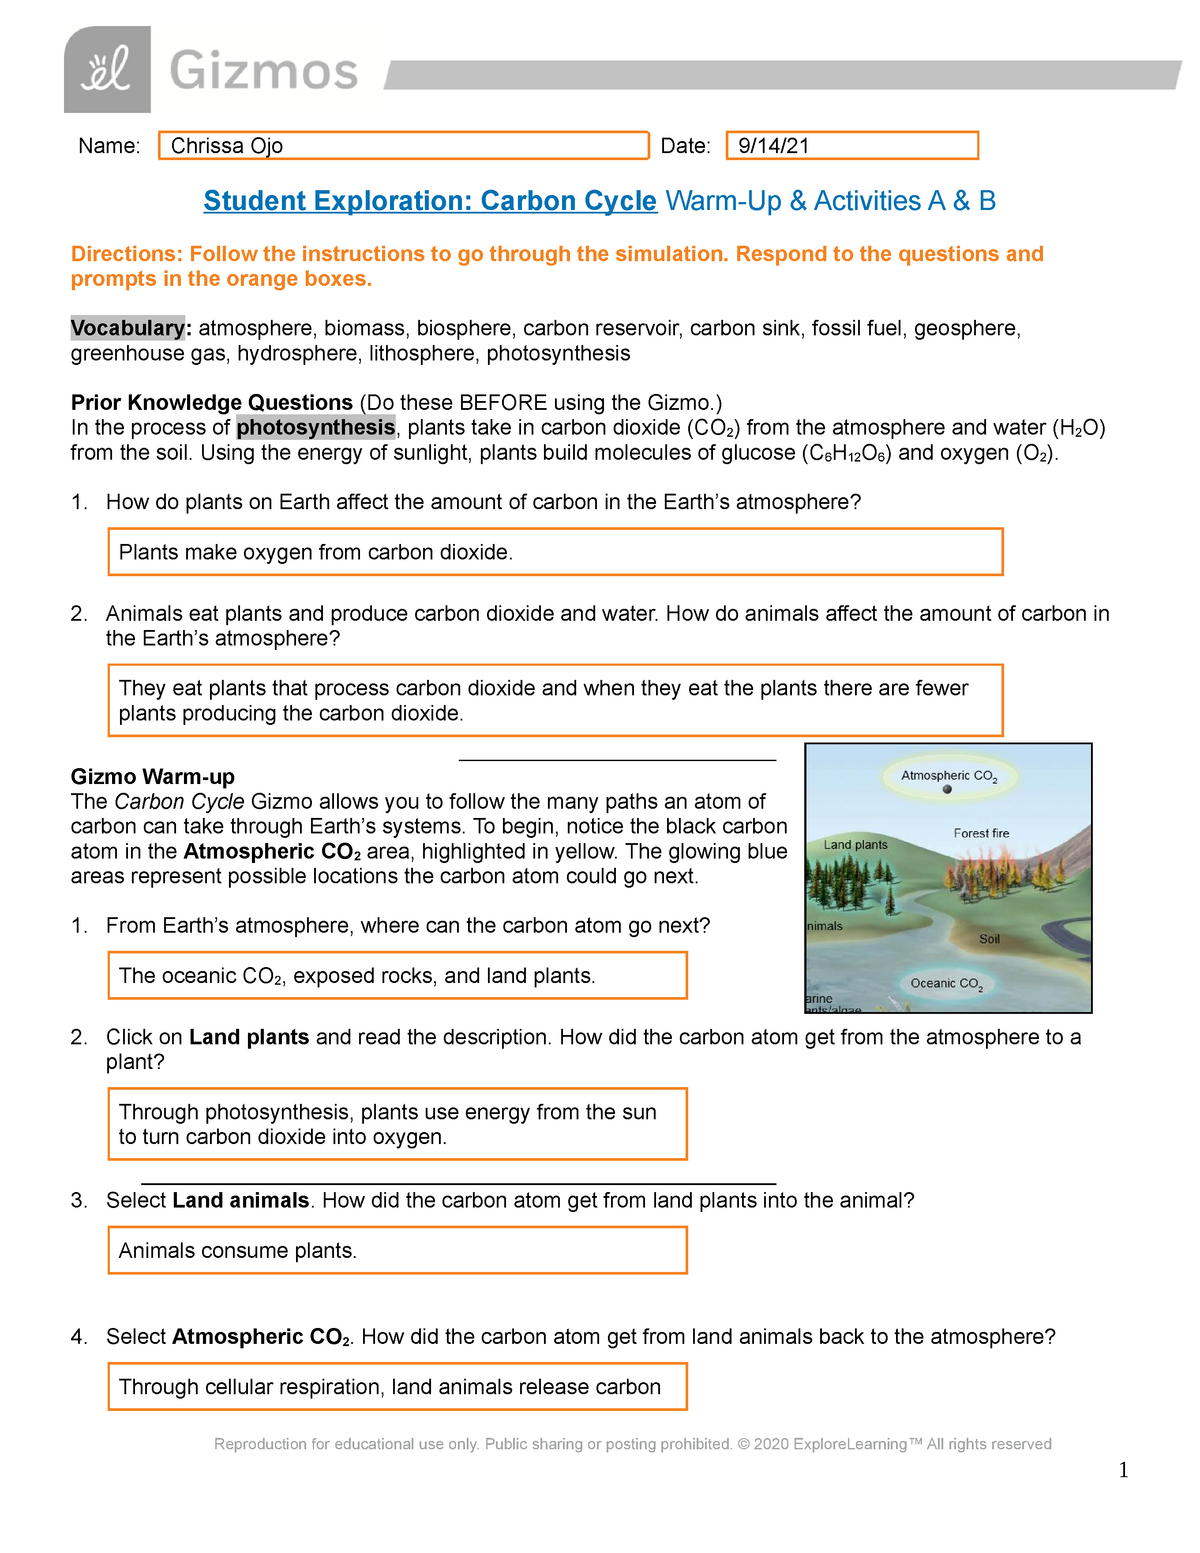 Carbon Cycle Gizmos SE Sheet Warm Up & Activities A & B-4 - Name: Chrissa  Ojo Date: 9/14/ Student - Studocu